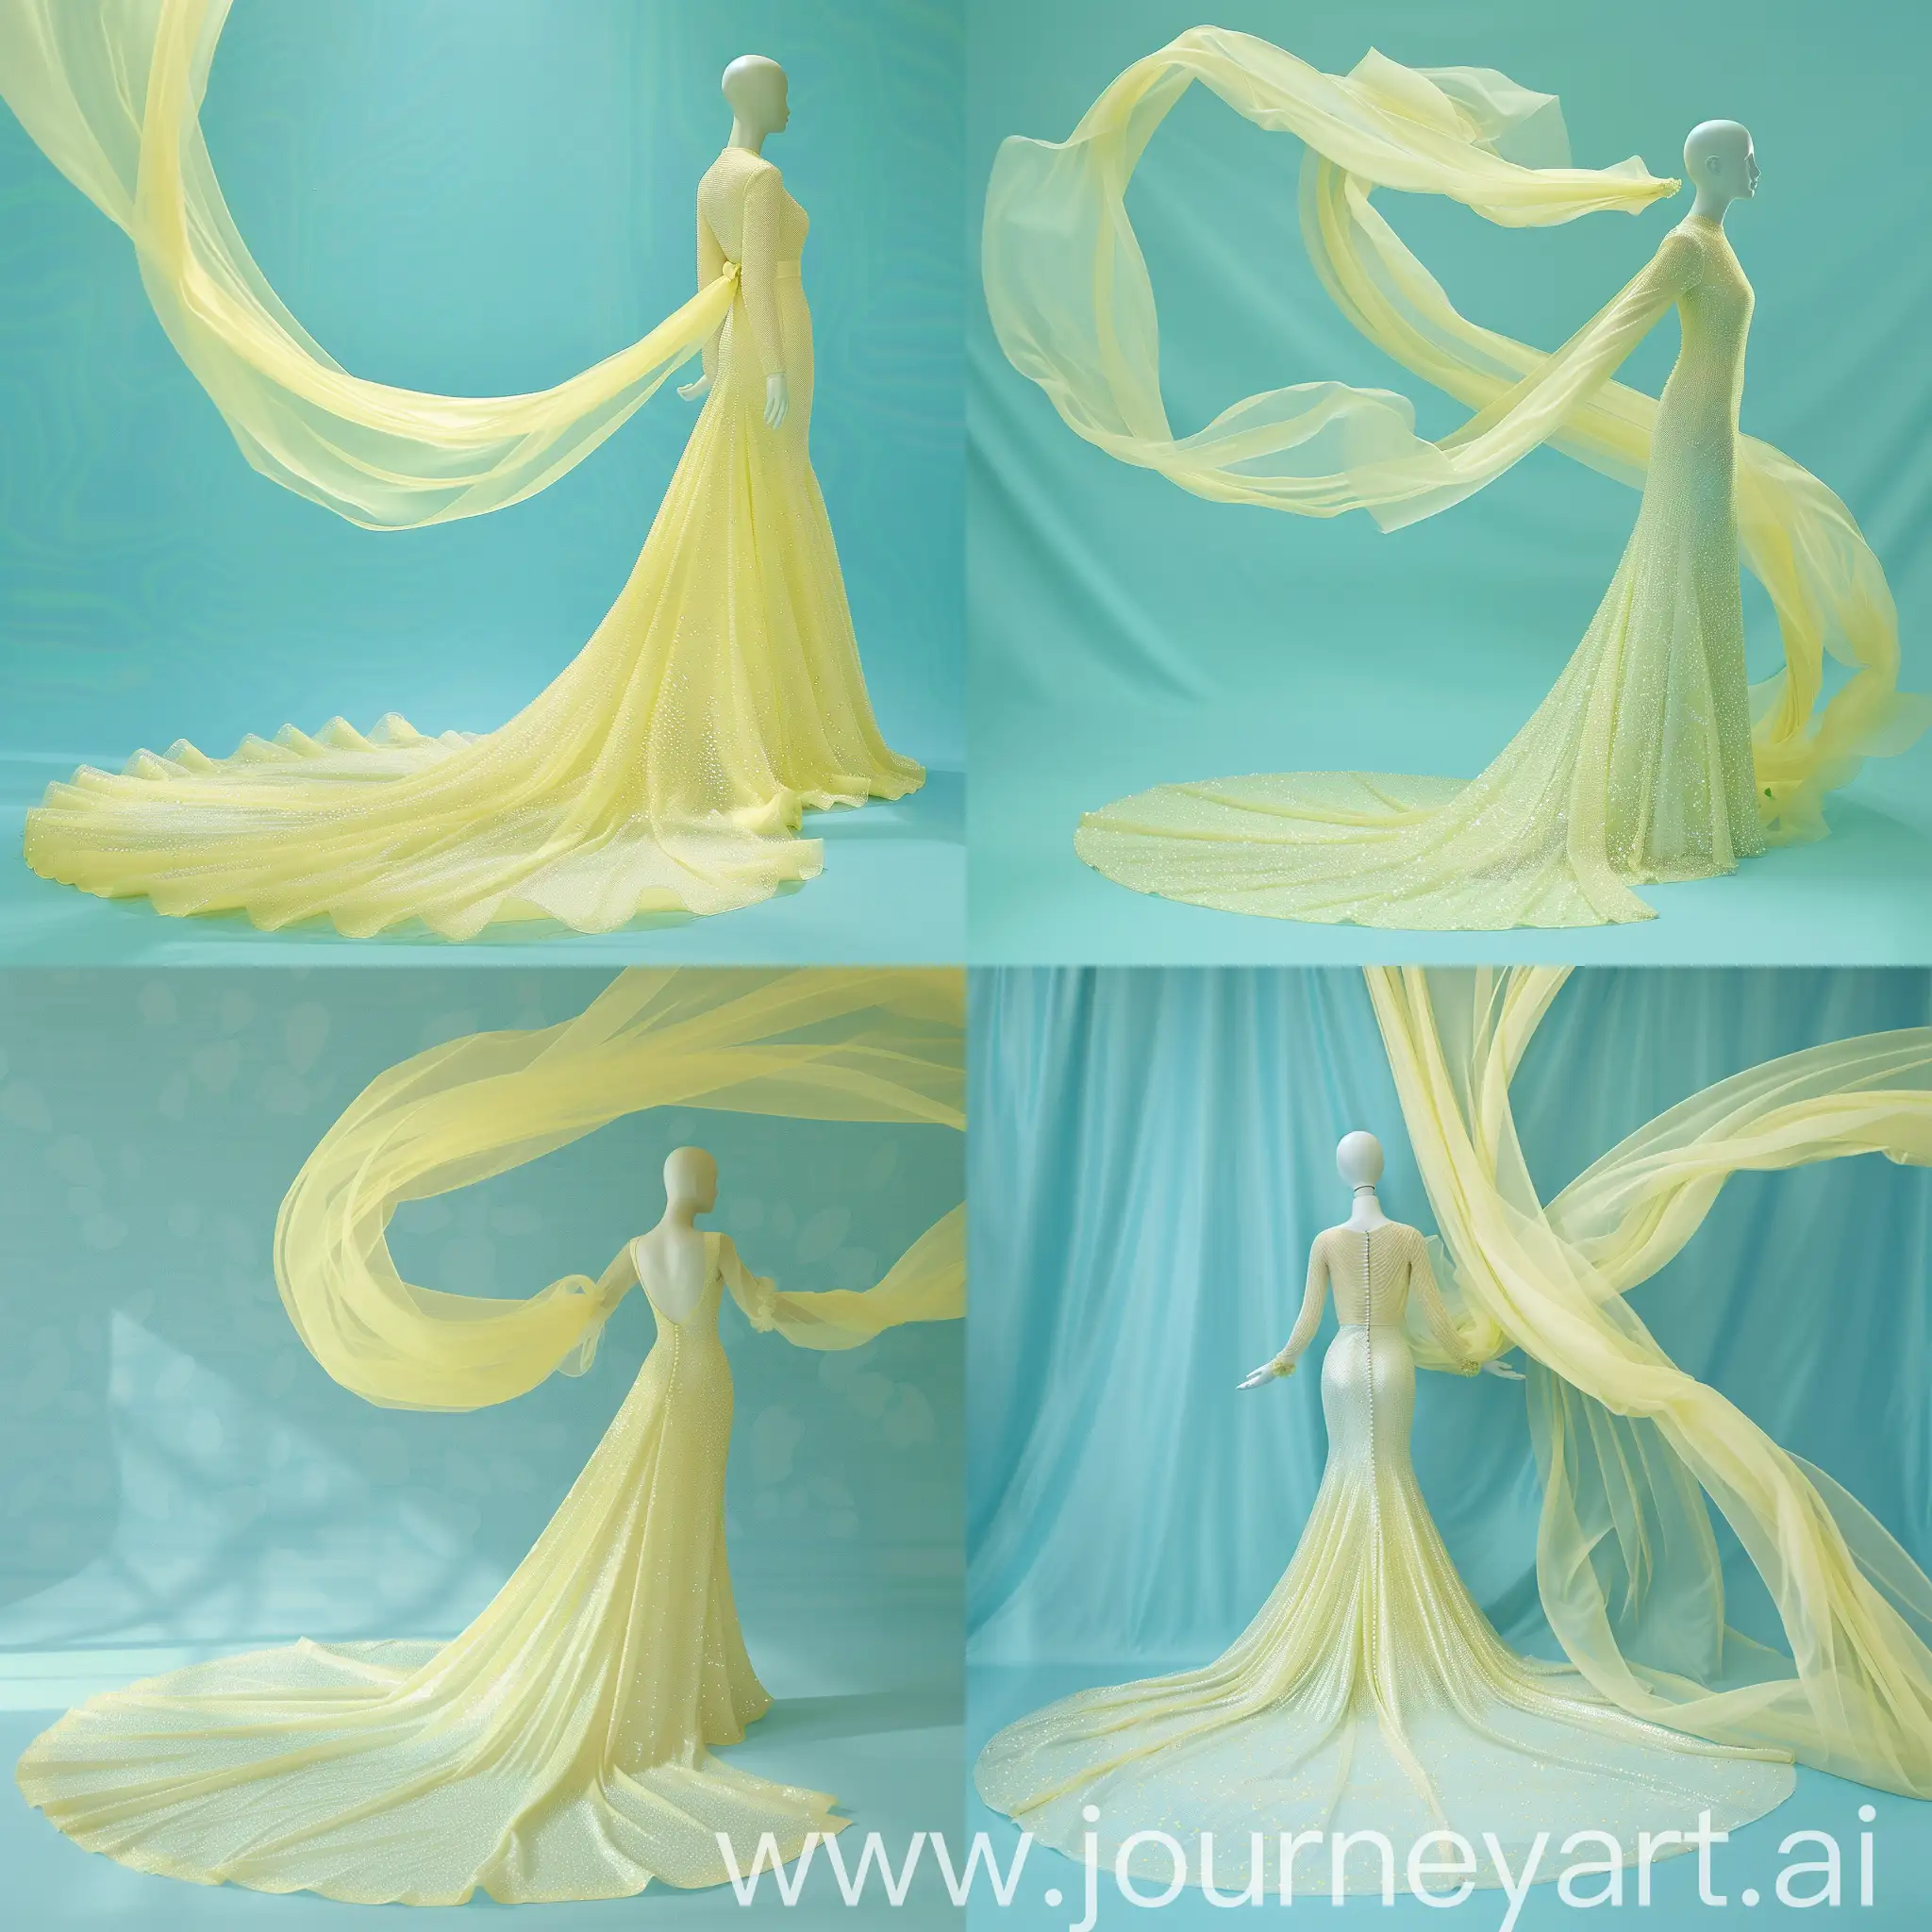 soiree dress shopfront retail . shows a plastic  mannequin wears a long tight light yellow pearled  dress with a long train . the background is solid aqua blue wallpaper and  light yellow organza fabric begins from the train of the dress and flying smoothly in circular way to the top